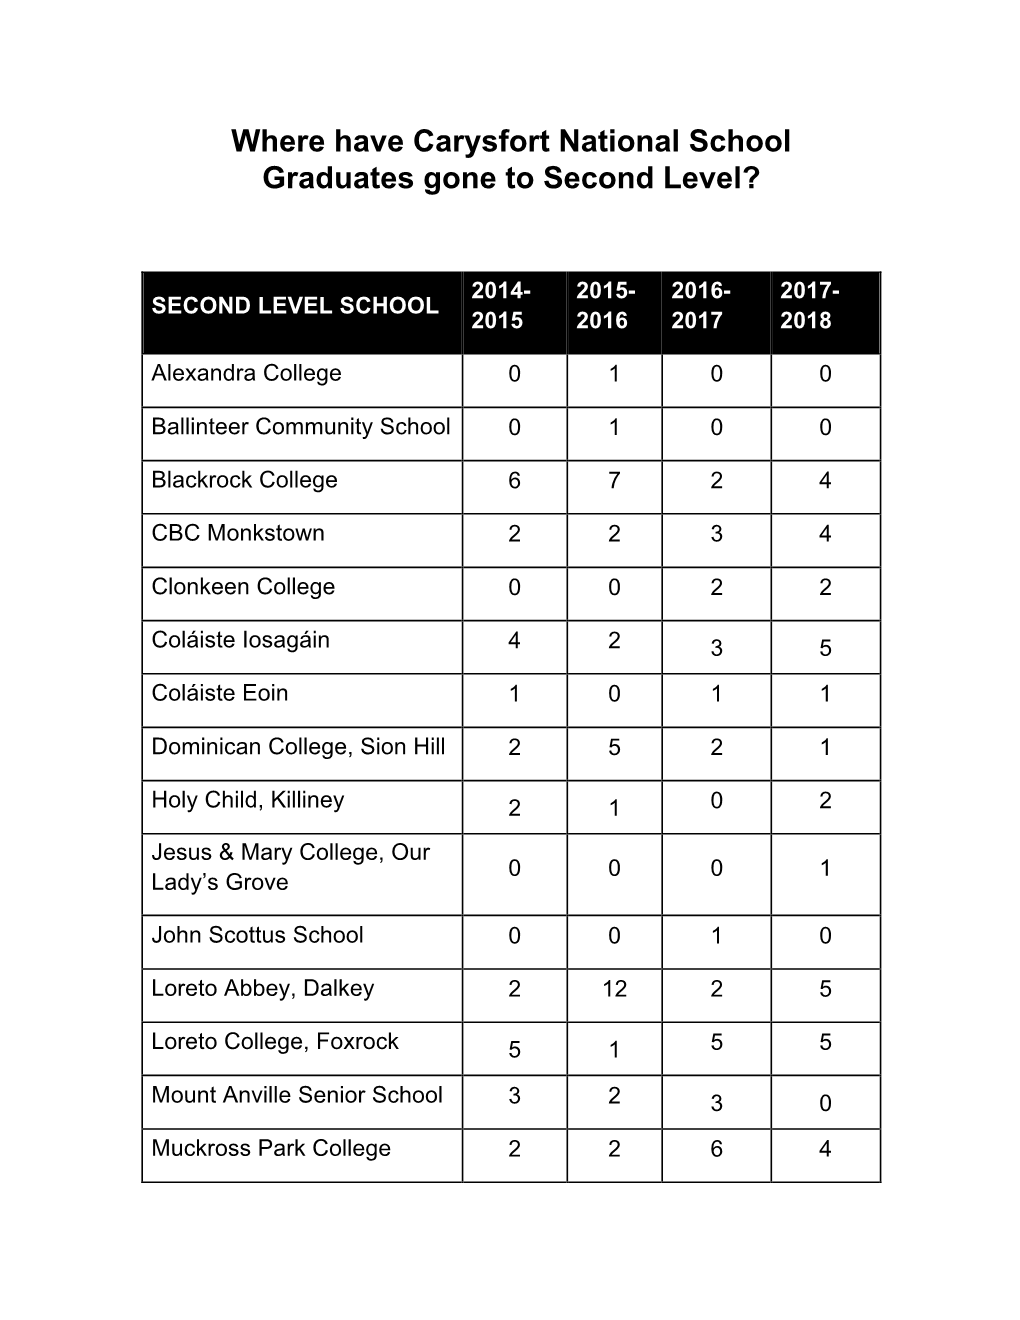 Where Have Carysfort National School Graduates Gone to Second Level?